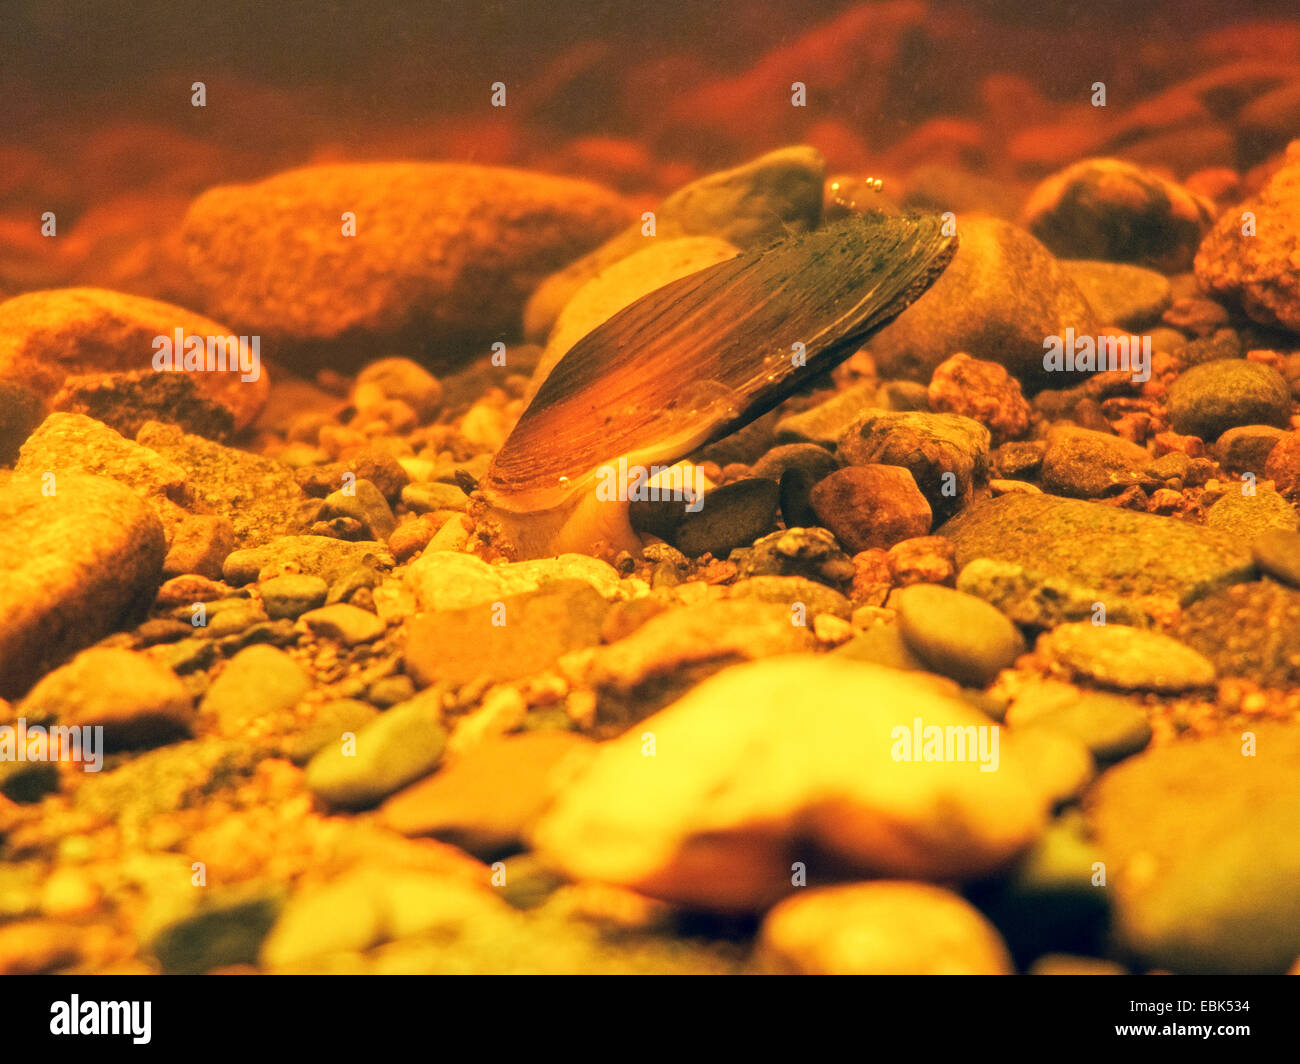 freshwater pearl mussel (Scottish pearl mussel), eastern pearlshell (Margaritifera margaritifera), digging into the river sediment with the foot, Russia, Karelien, Varzuga River Stock Photo